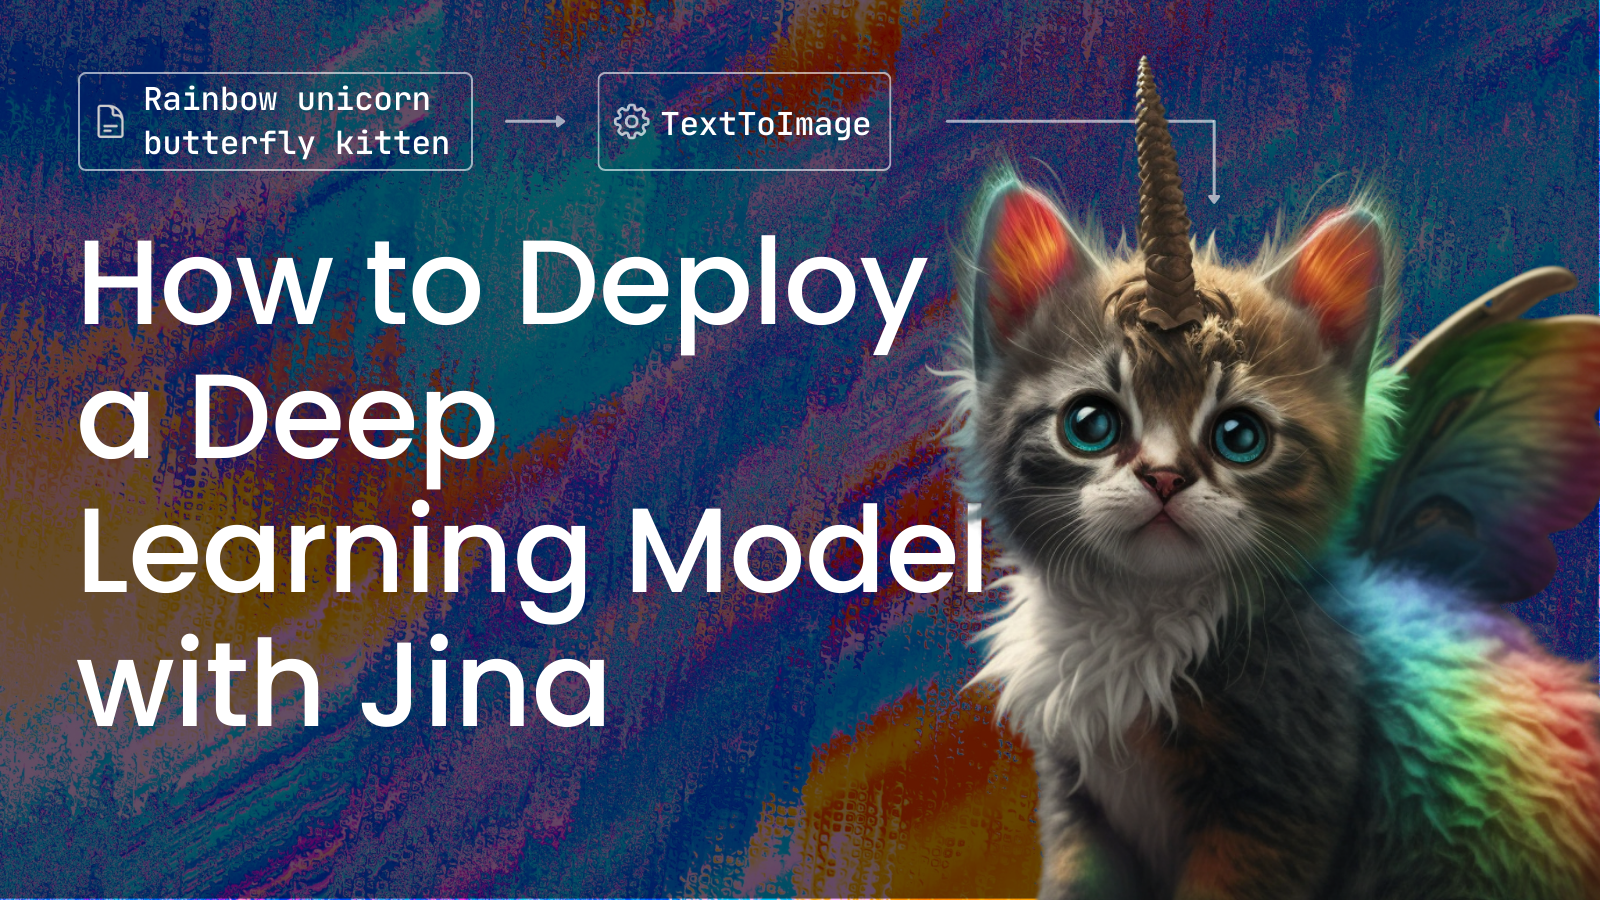 Illustration of a kitten with rainbow wings and a unicorn horn with text "How to Deploy a Deep Learning Model with Jina.